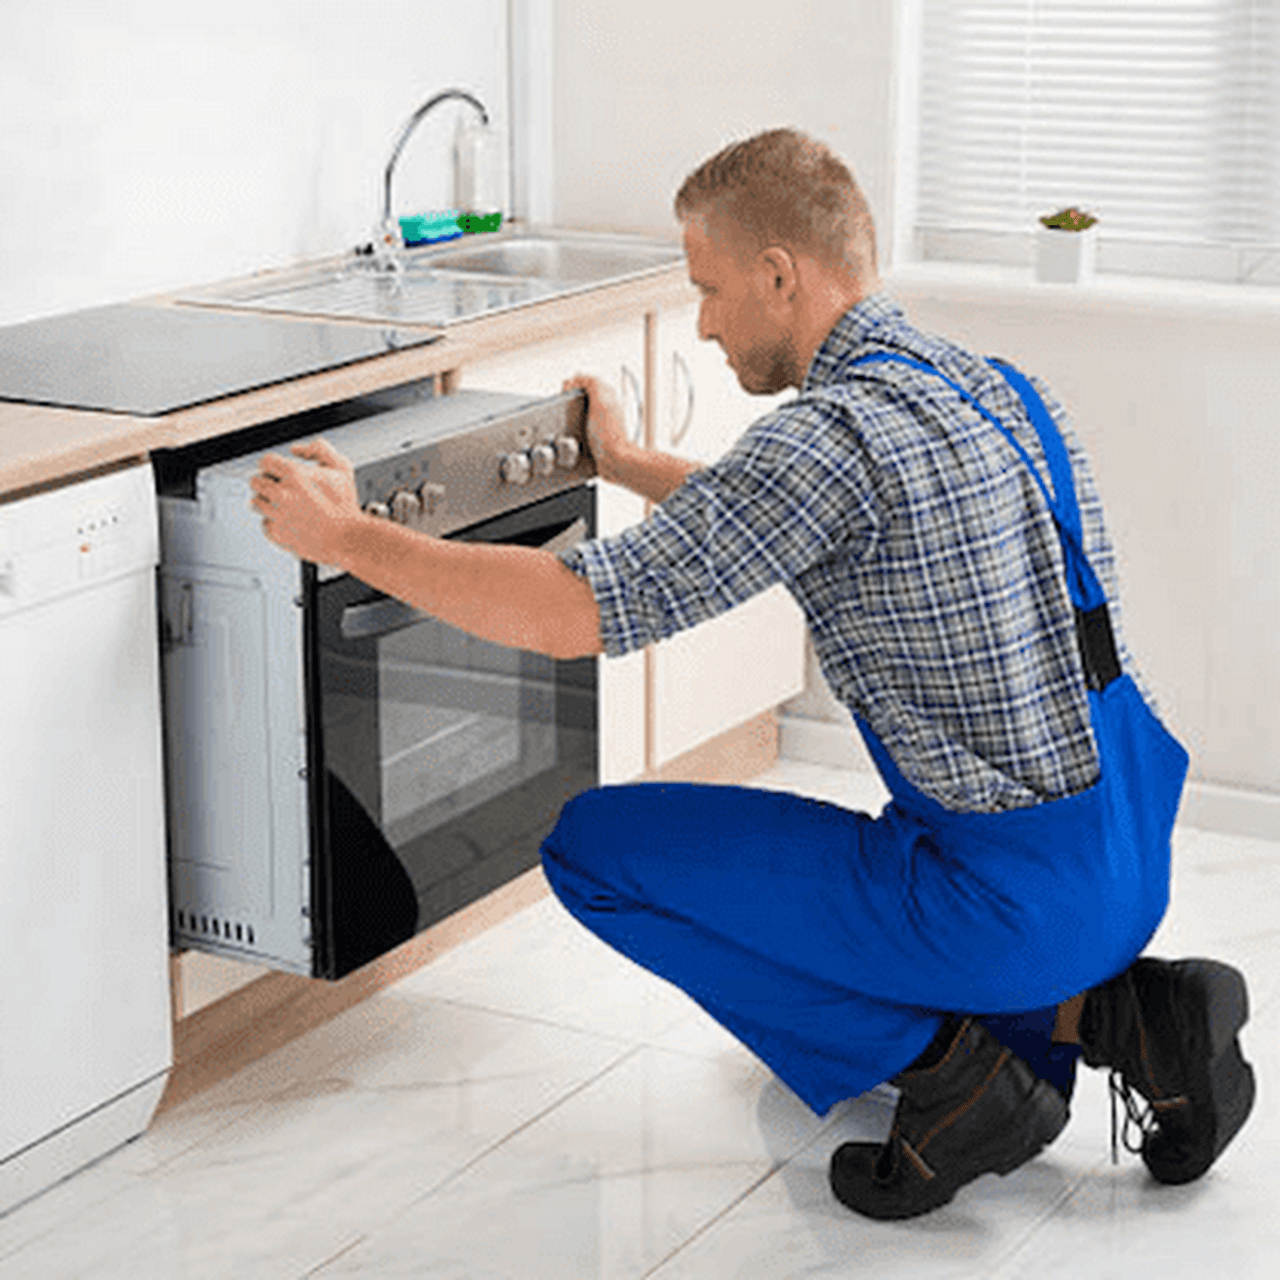 Why one should get a dishwasher repair for their kitchen?